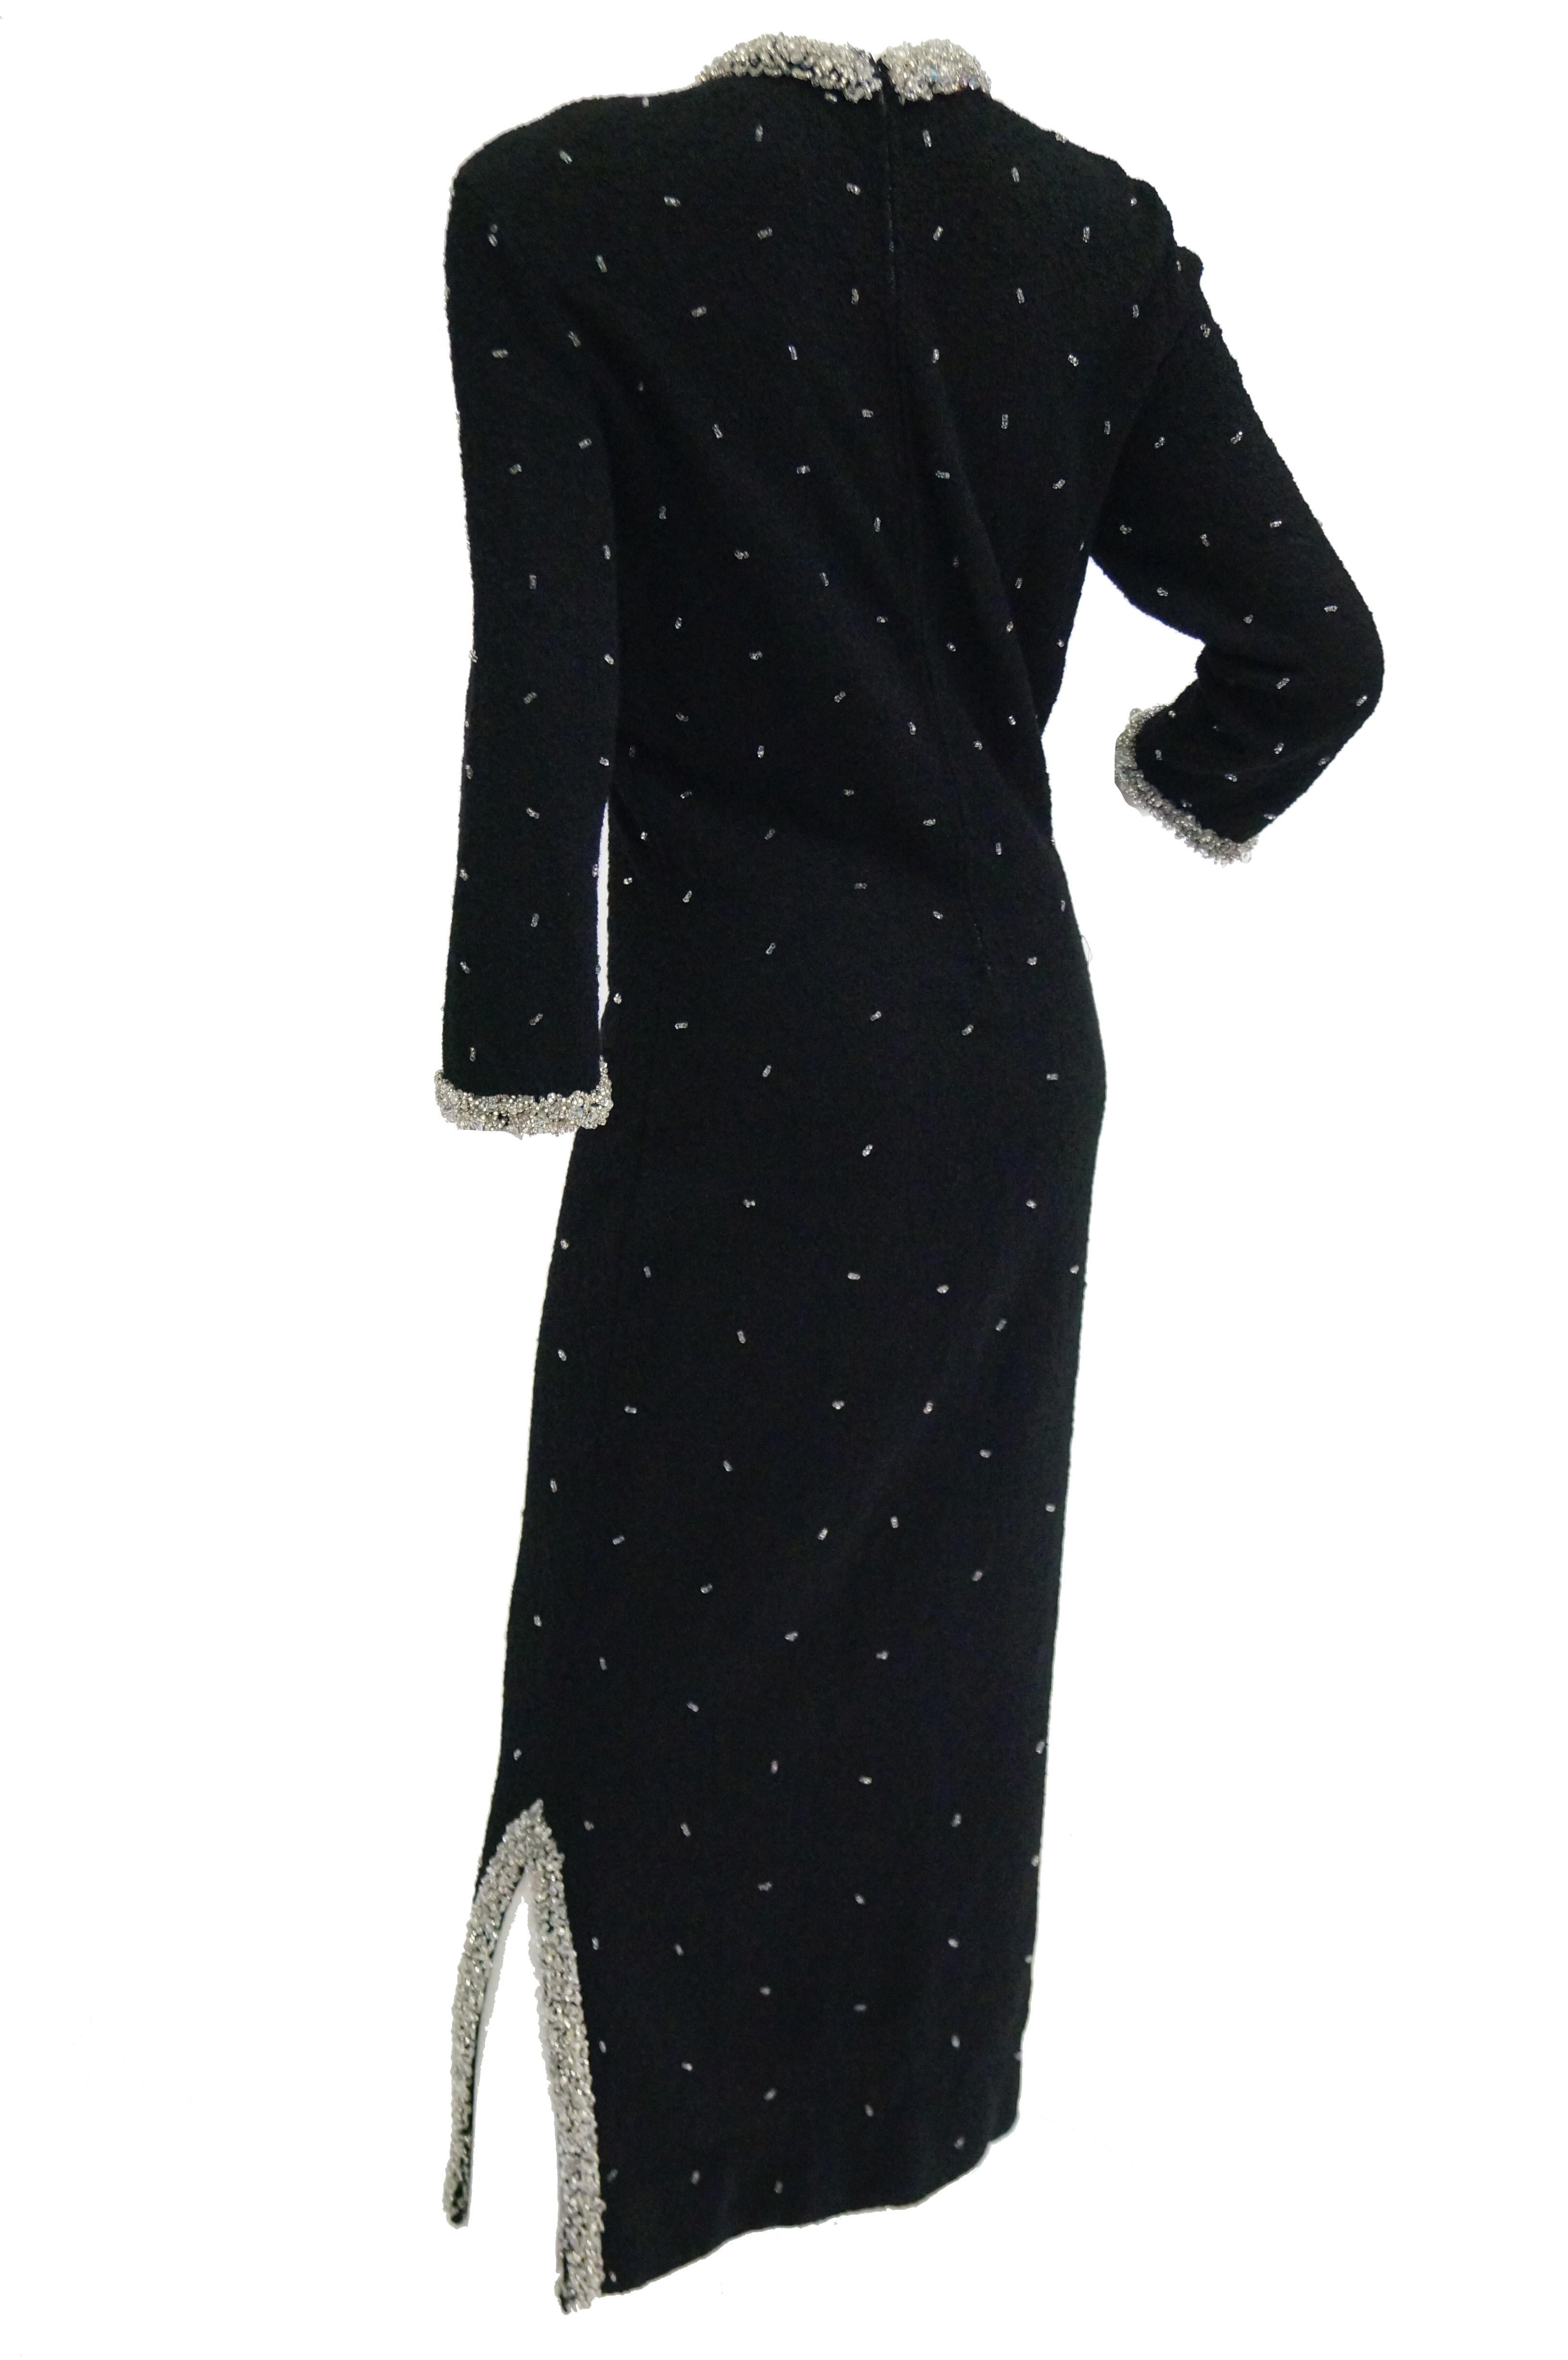 1960s Black Wool Knit Evening Dress Featuring Silver Glass Seed Bead Detail For Sale 1